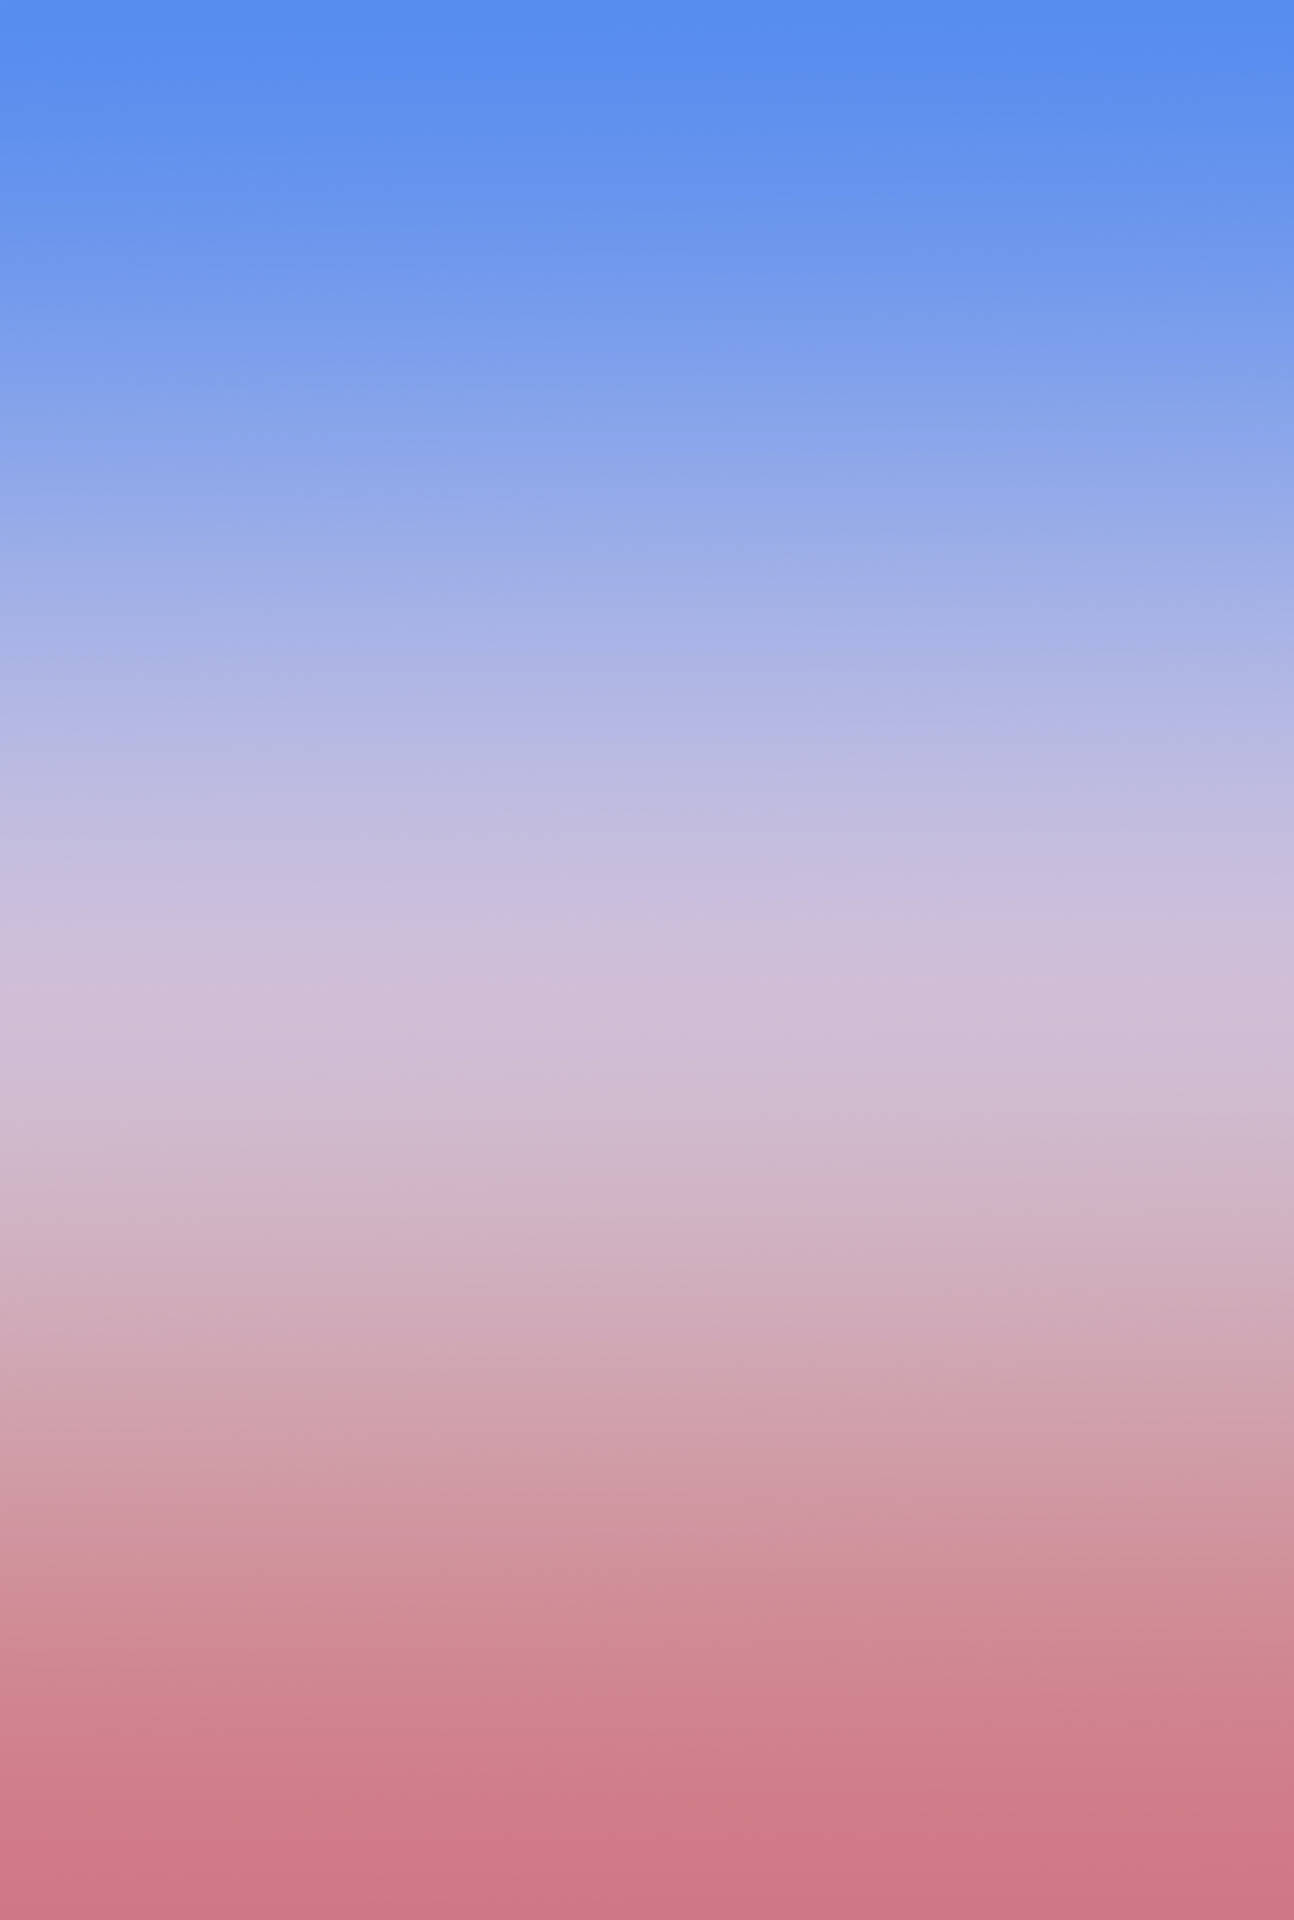 4719X7000 Gradient Wallpaper and Background